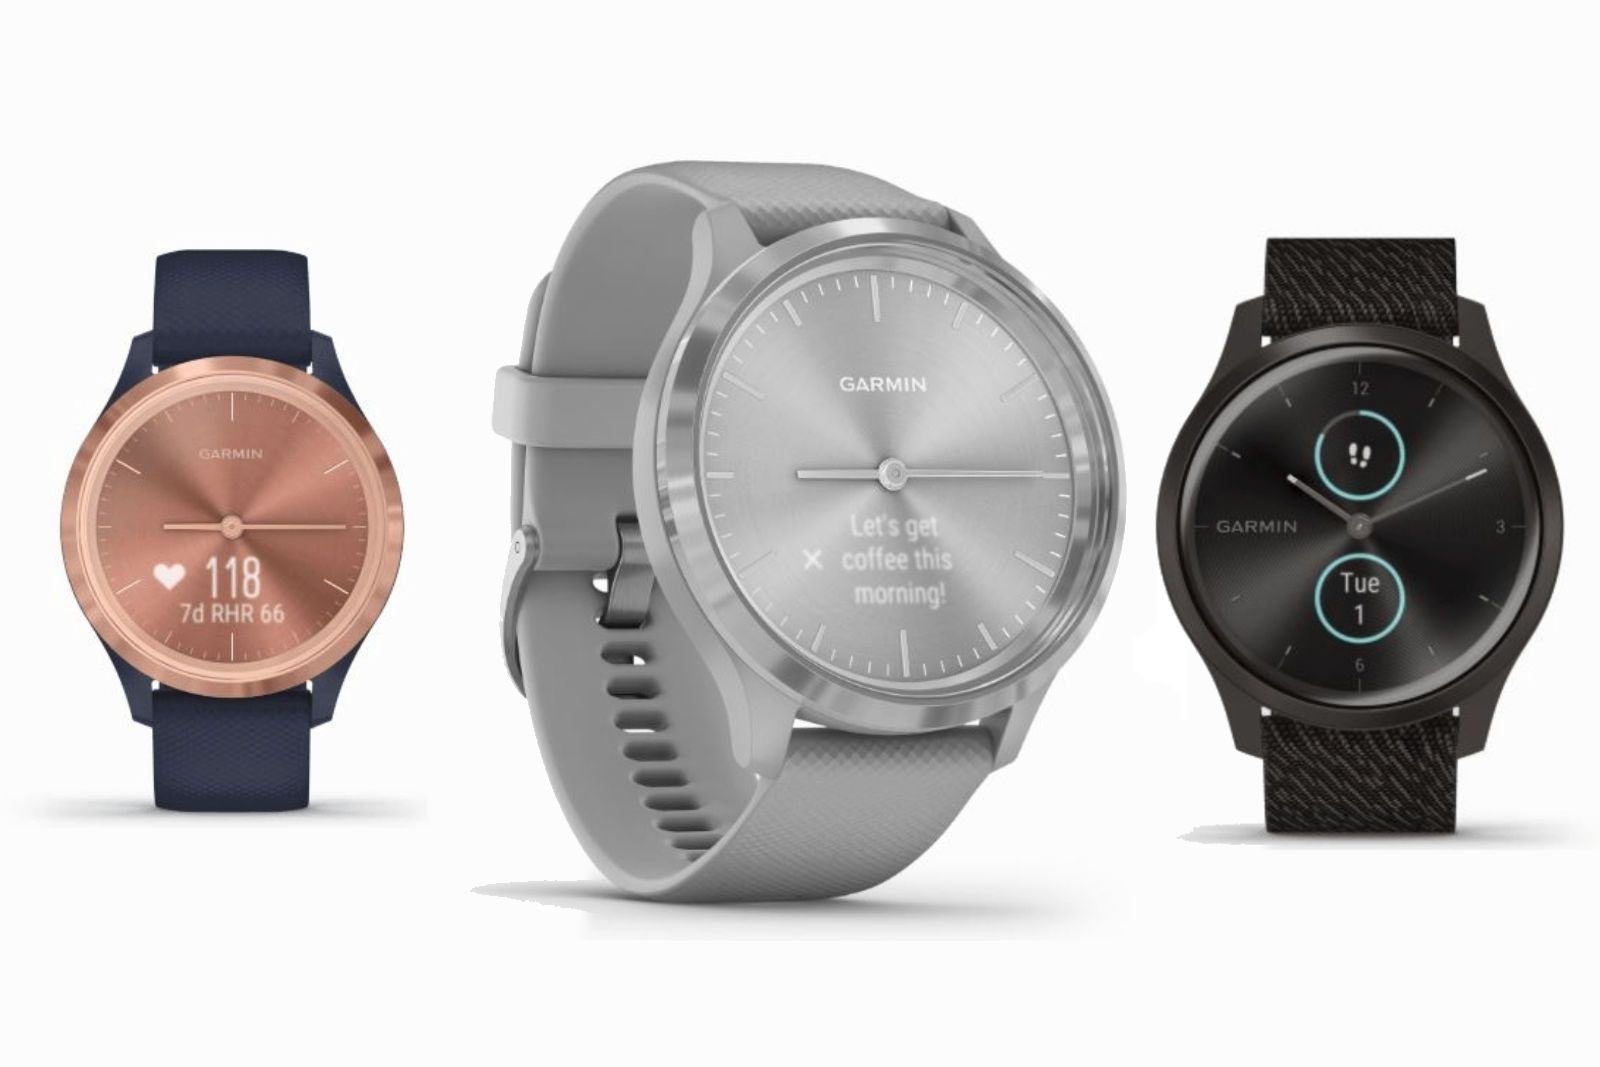 Six new Garmin watches have leaked showing an entire new lineup image 1